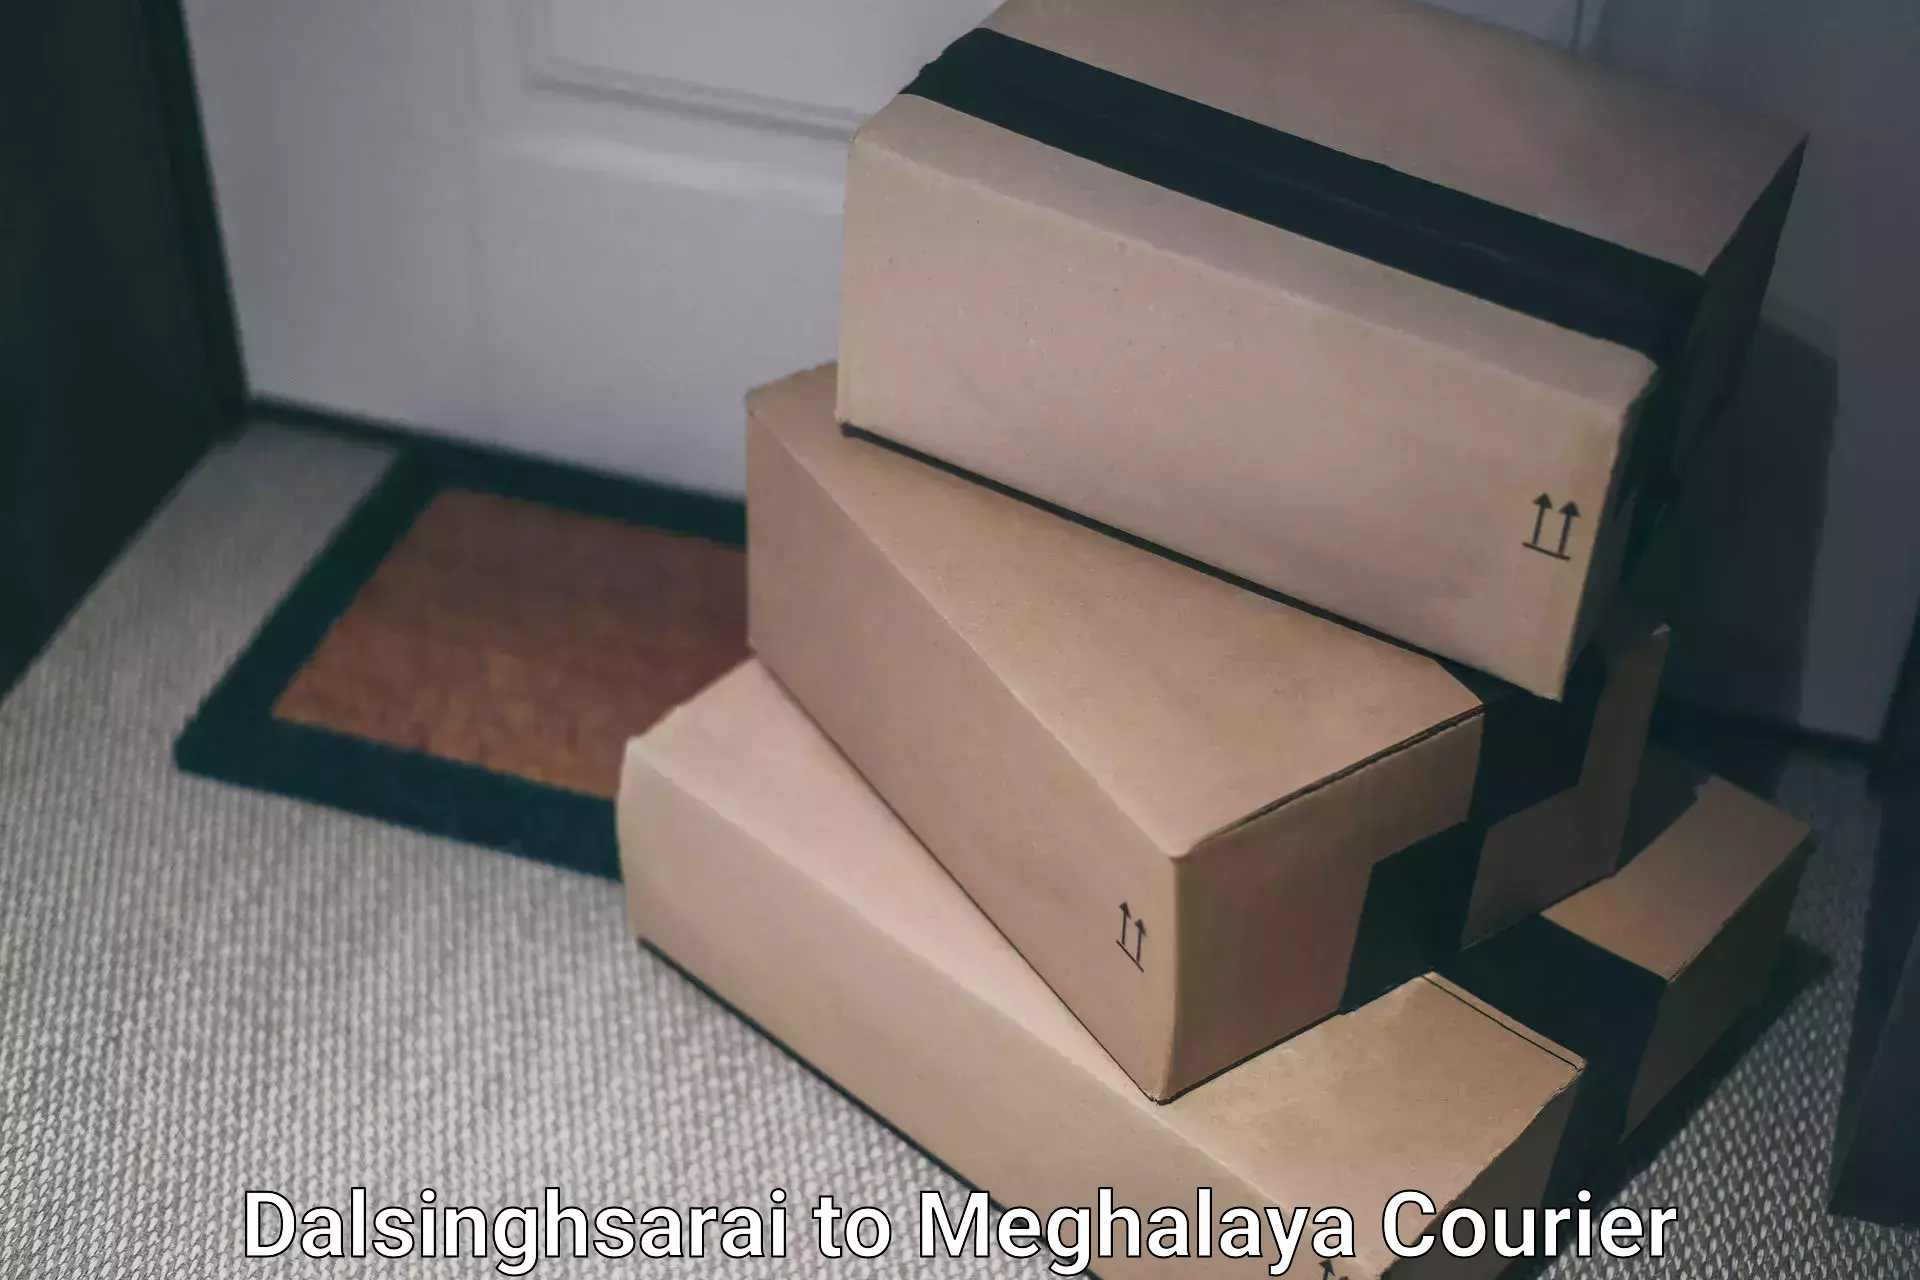 Parcel service for businesses Dalsinghsarai to Meghalaya